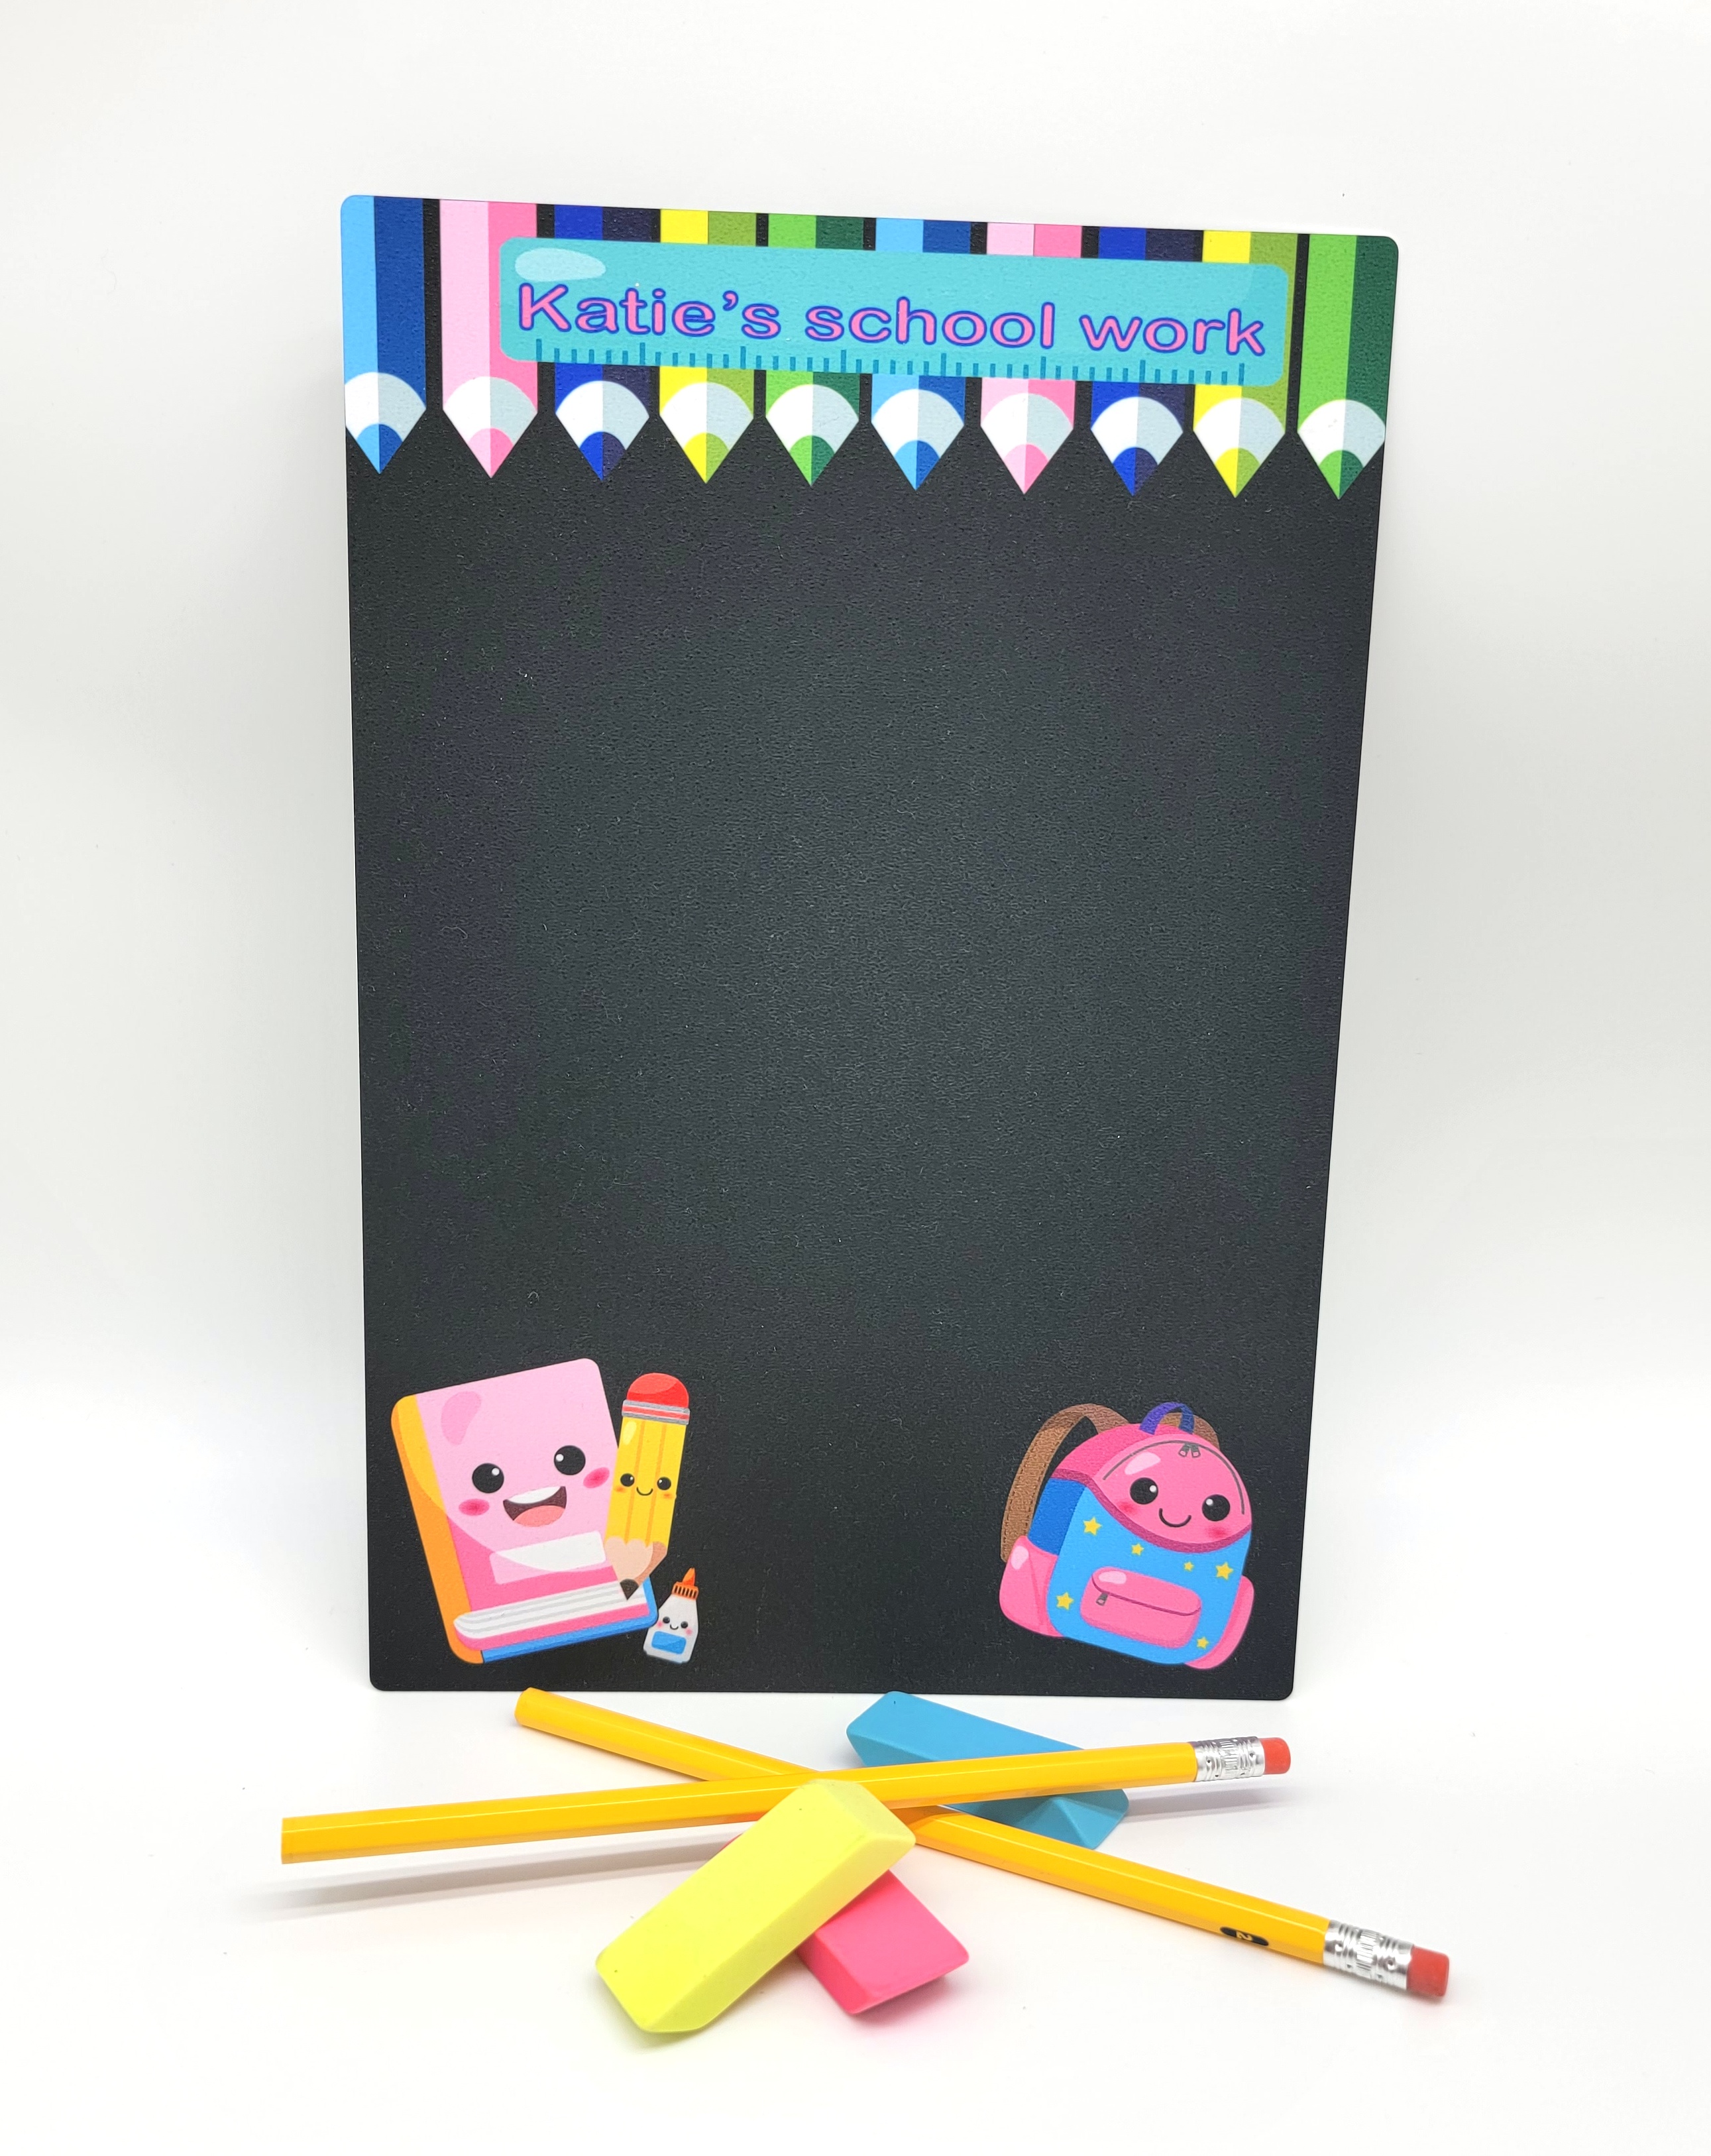 Back to school chalkboard, great for keeping up with school and homework